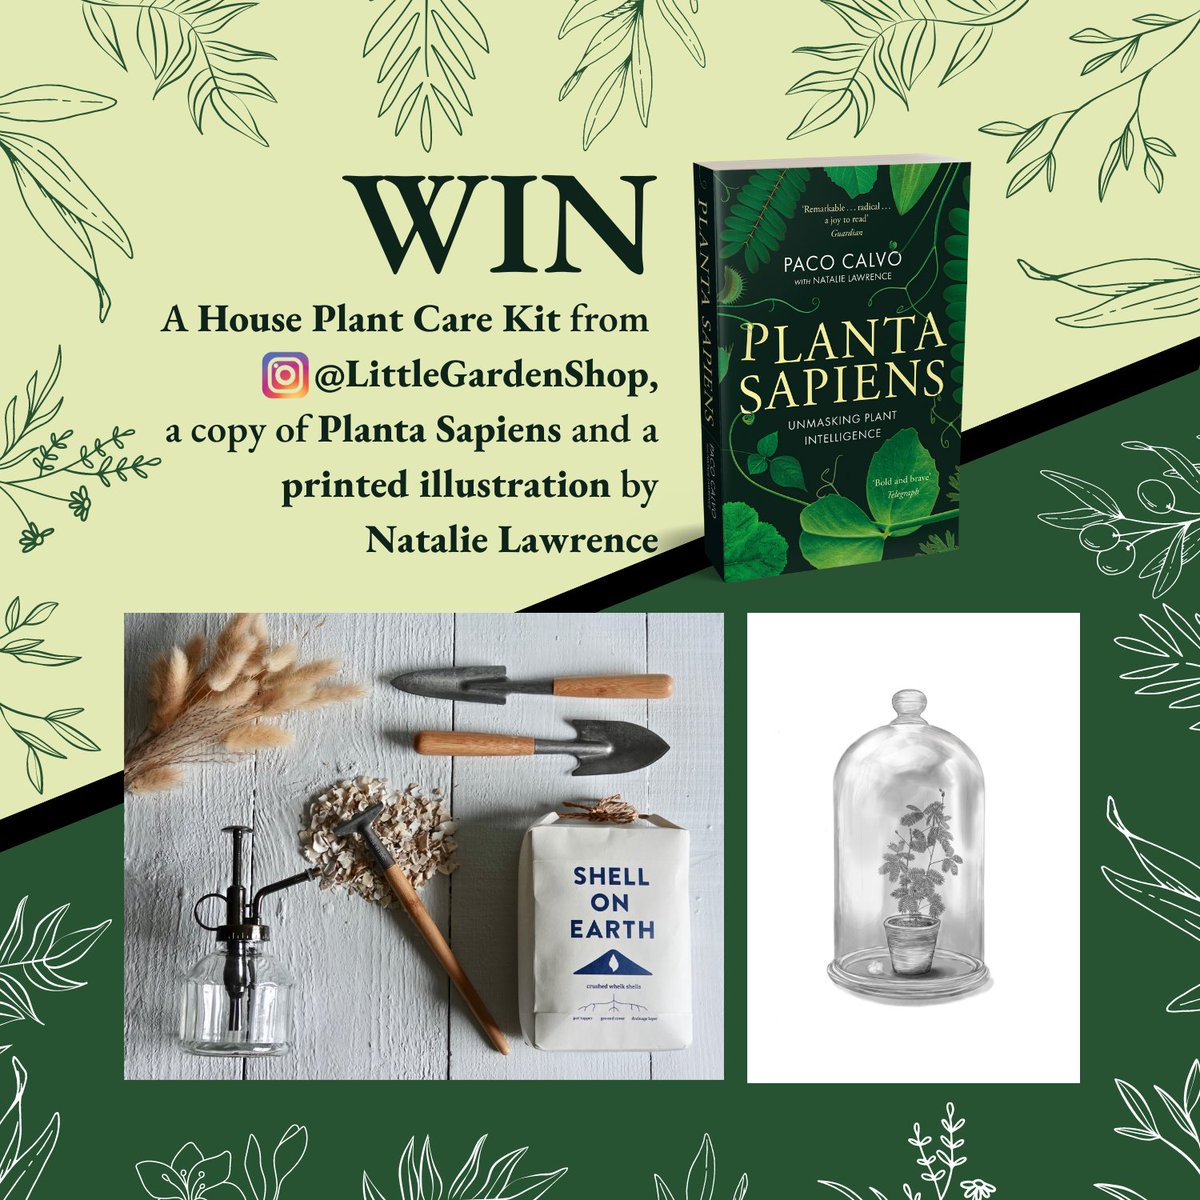 🌱WIN🌱 💚A house plant care kit from LittleGardenShop 💚A paperback copy of Planta Sapiens by Paco Calvo and @the_manticore_  💚A printed illustration by @the_manticore_  Simply retweet for your chance to win! Winner will be contacted by @LittleBrownUK after the 27th July.